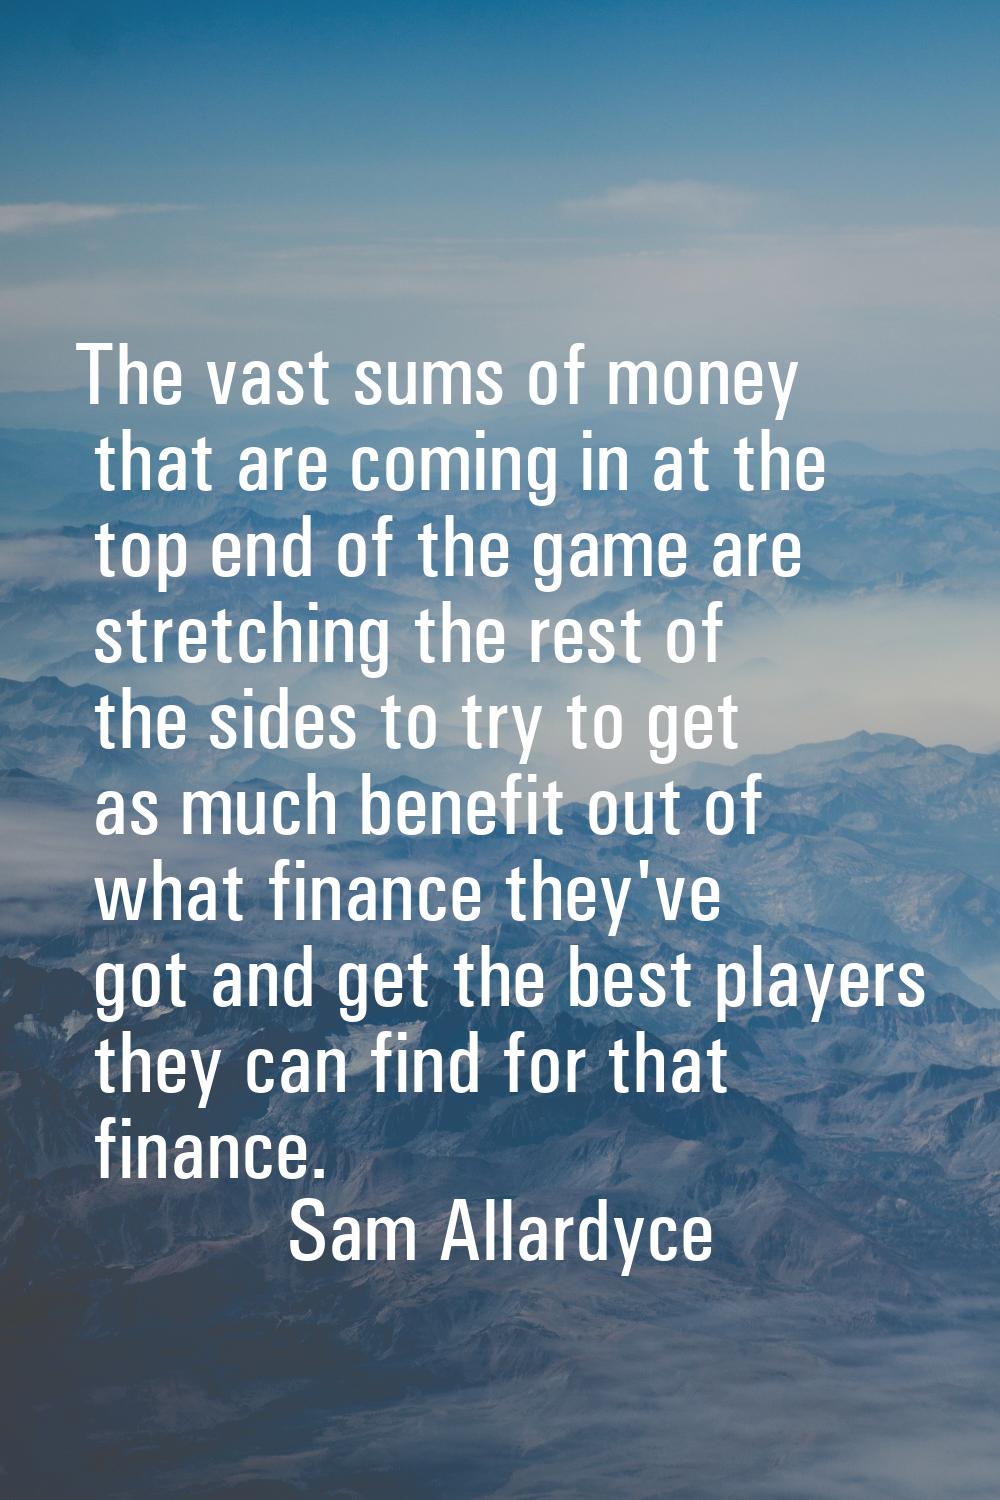 The vast sums of money that are coming in at the top end of the game are stretching the rest of the